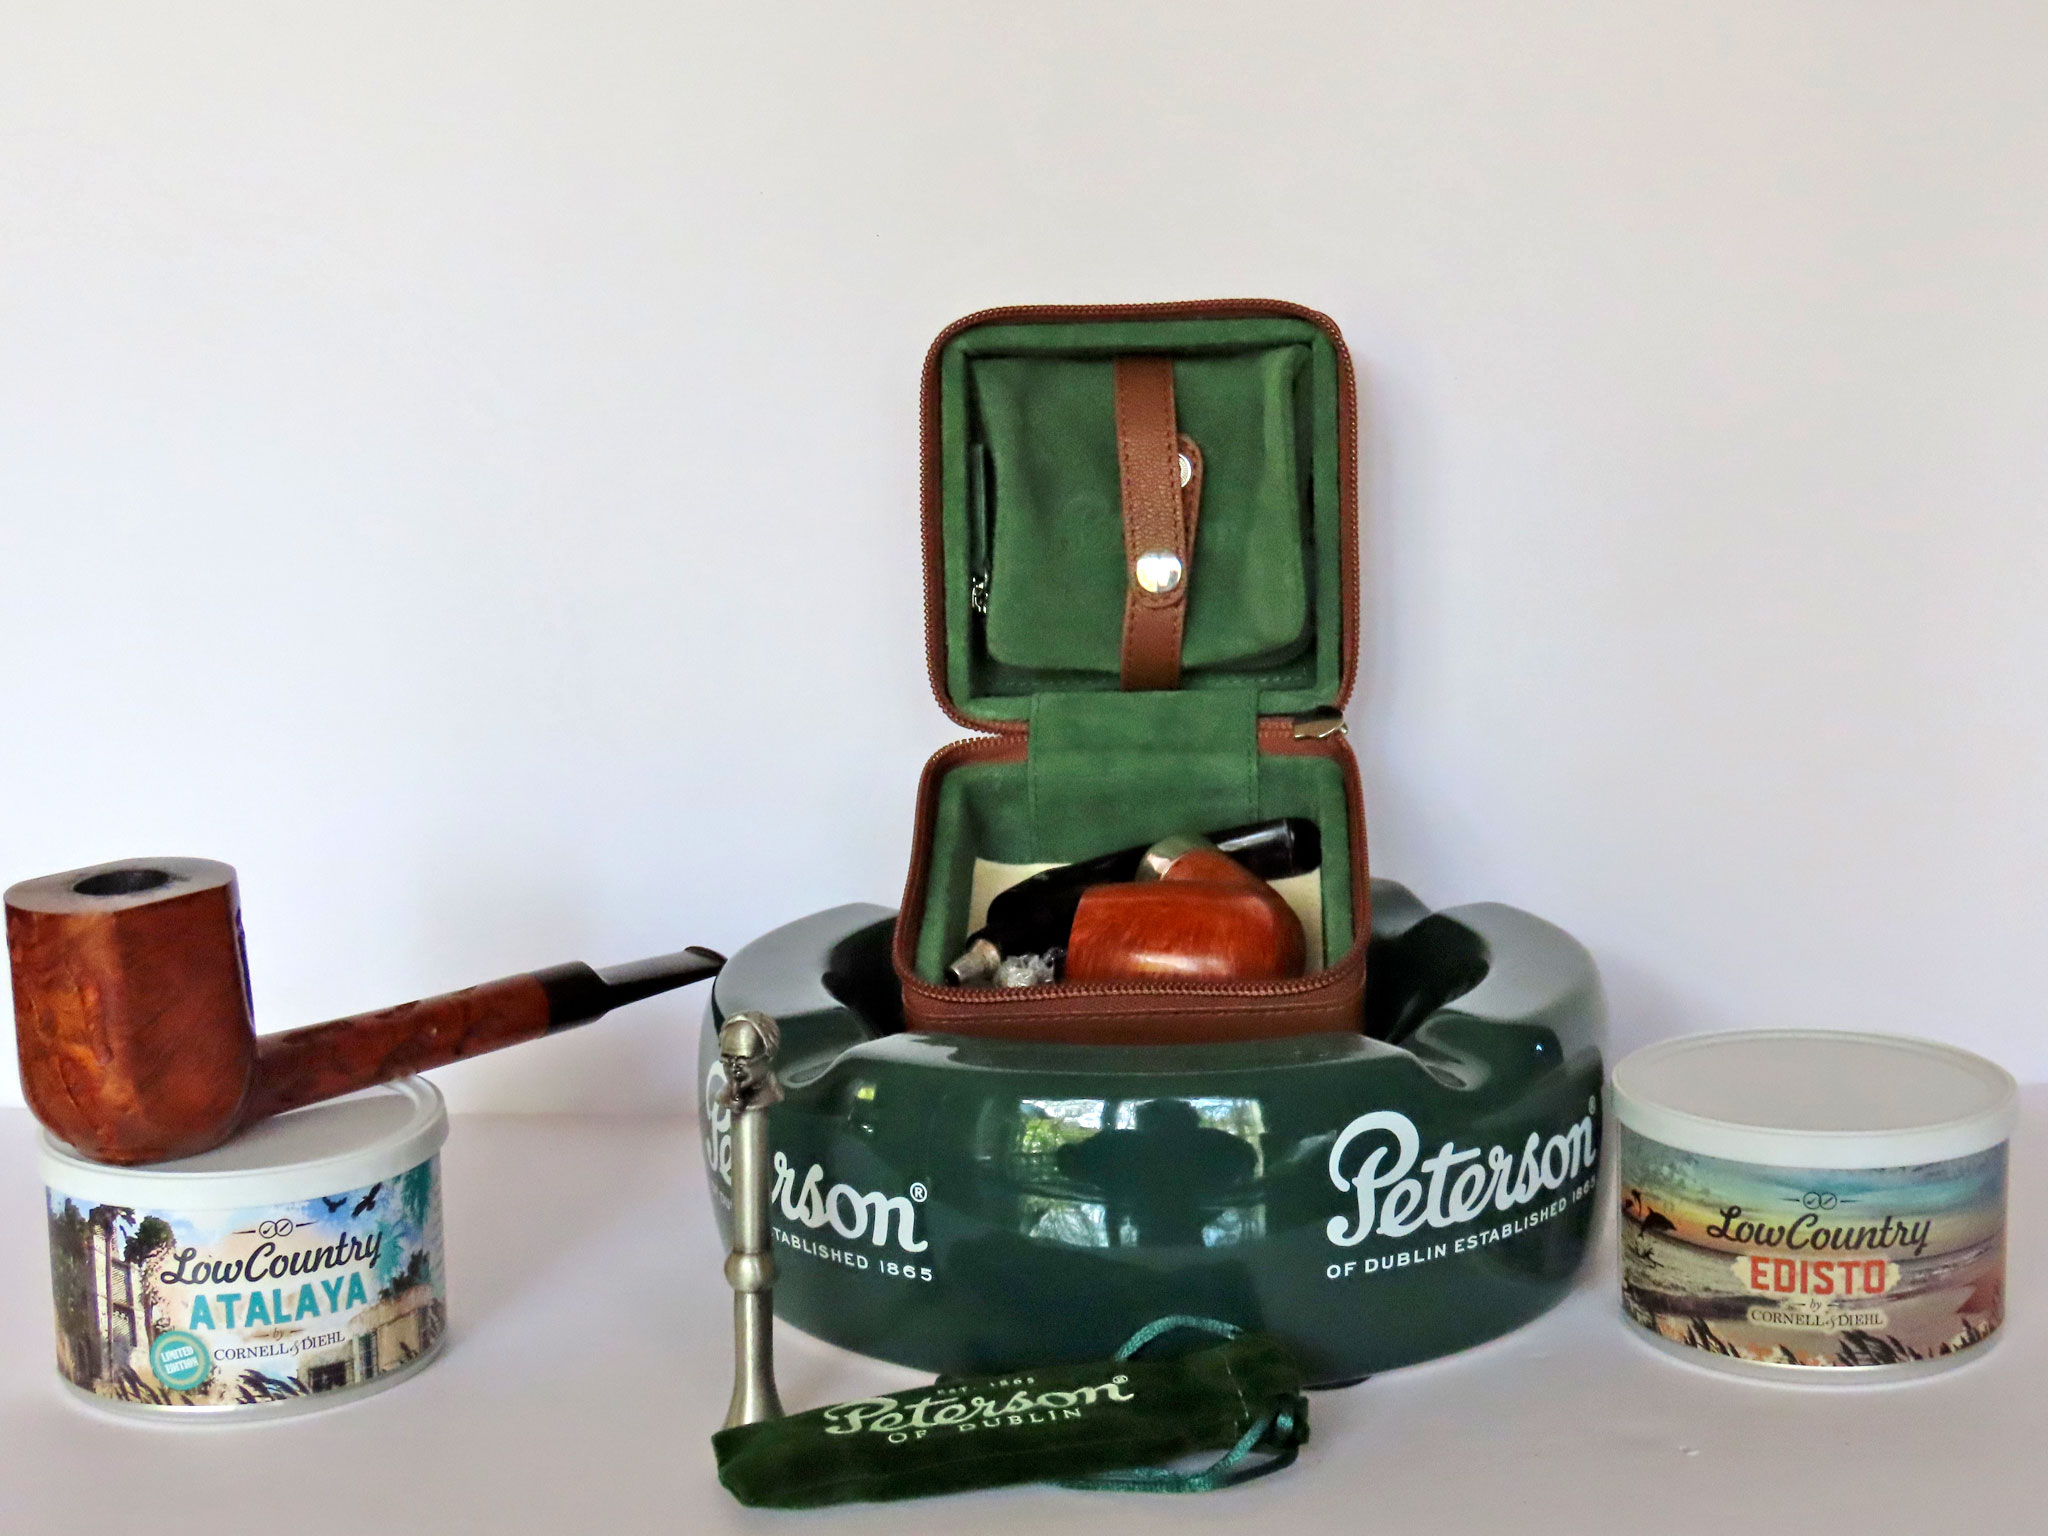 From L-R: The Rich Lewis Custom Bill NASPC 2014 POY atop a fresh tin of Low County Atalaya a ready-rubbed blend combining Red and Bright Virginias from 2019 with C&D's proprietary Red Virginia Cavendish.Peterson’s Grafton System Pipe Travel Case specifically designed for Peterson System pipes, with matching leather pipe stand and a green suede tobacco pouch. Front: Peterson's Thinking Man pewter tamper, attributed to Peterson’s 1905 slogan, "The Thinking Man Smokes a Peterson Pipe." Far right: Fresh tin of C&D Low Country Edisto blend, Red Virginias pressed and sliced into flakes. Photo by Fred Brown